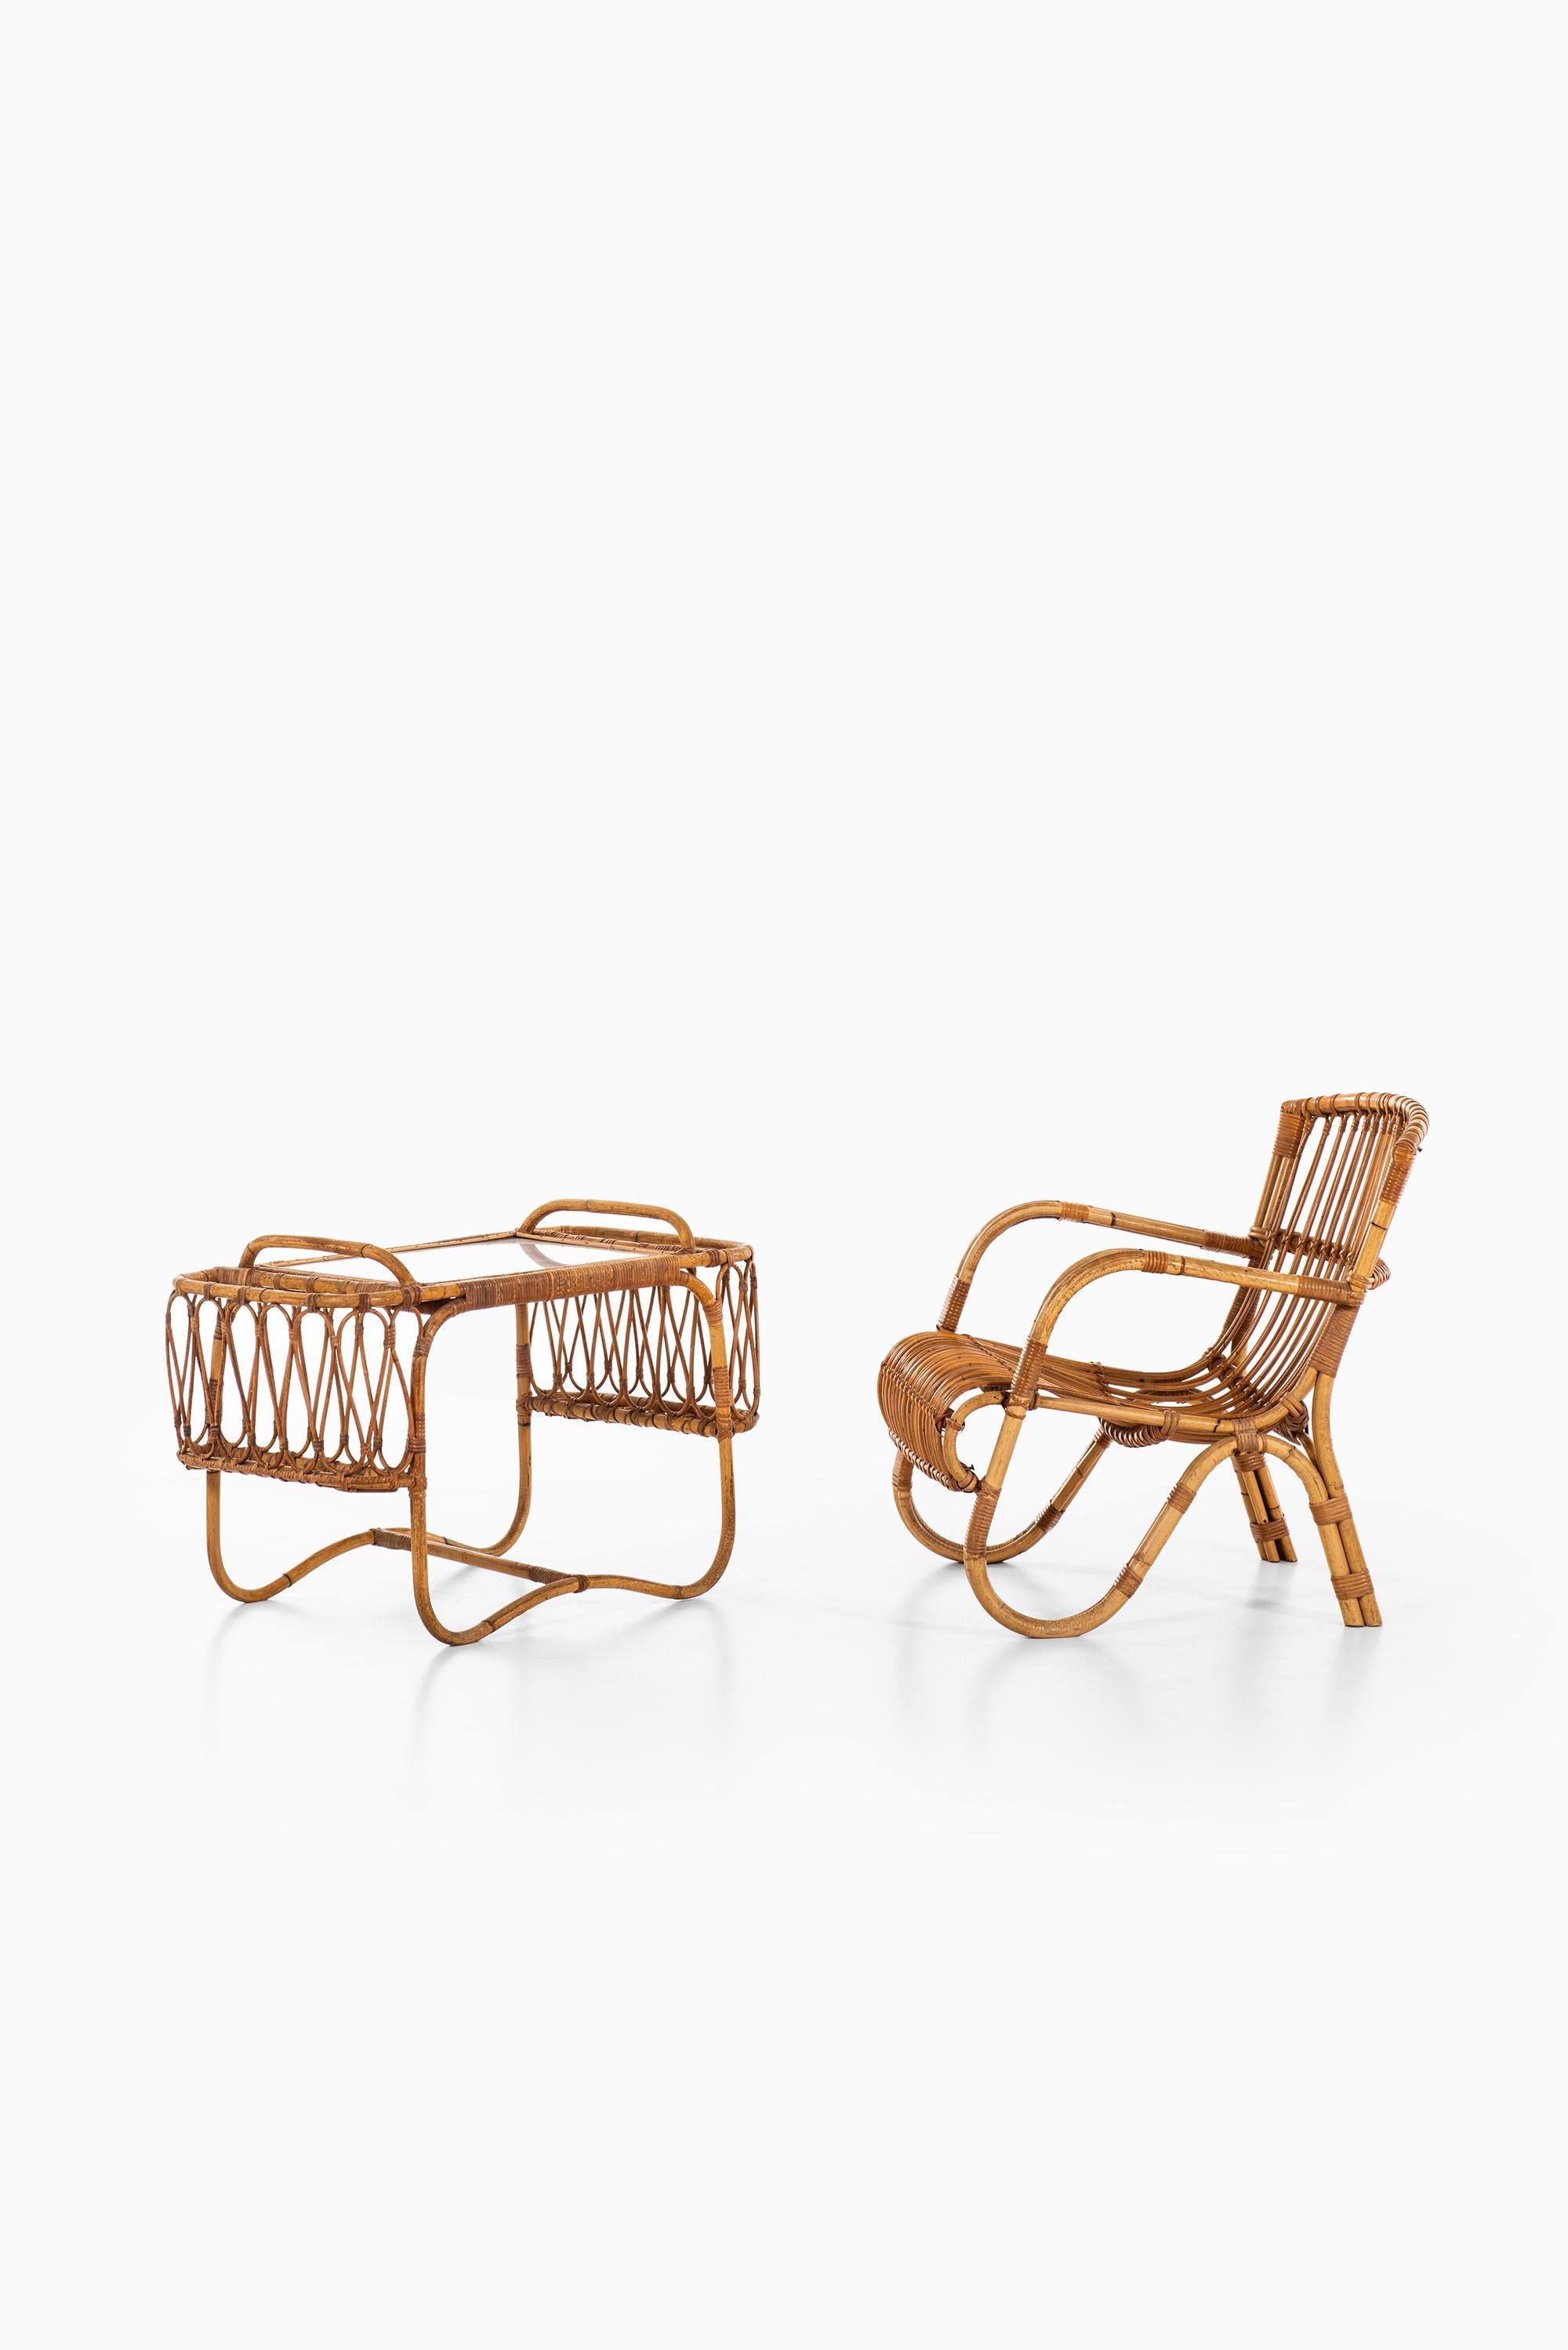 Pair of Easy Chairs in Rattan and Cane by E.V.A. Nissen & Co in Denmark 1